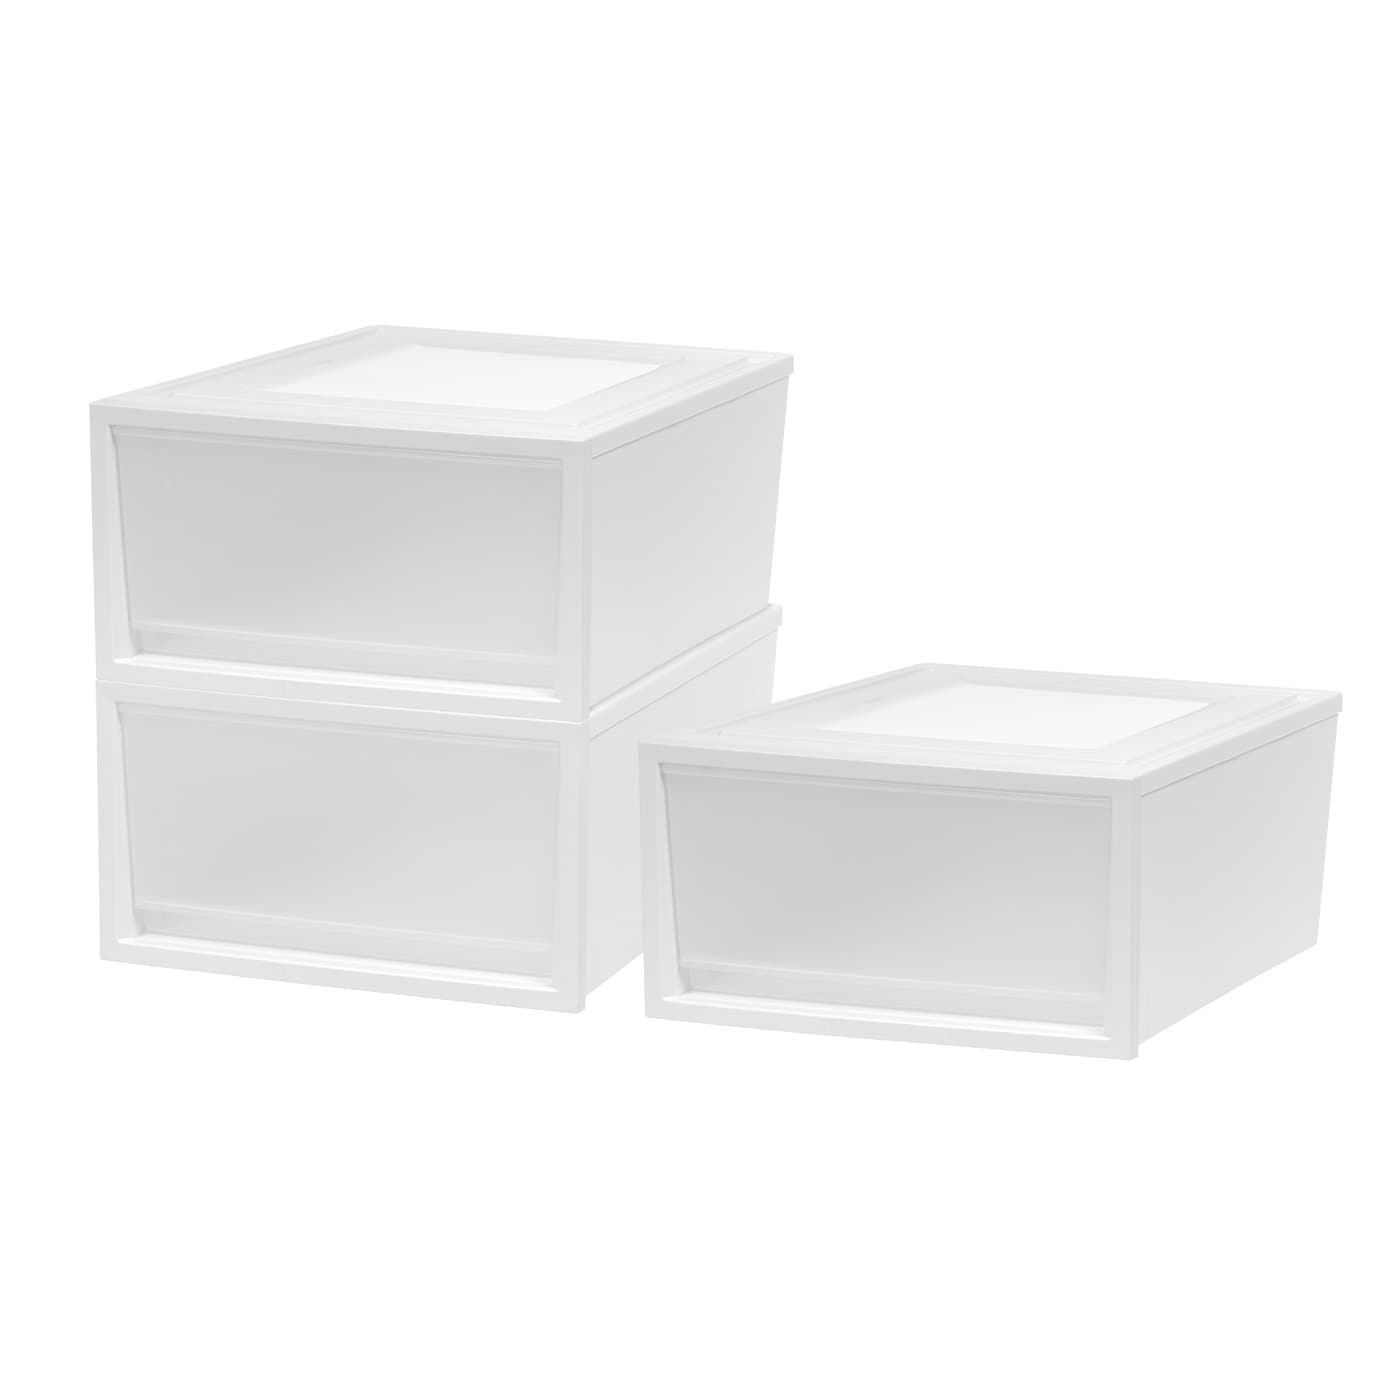 Drawer Storage Organizer - Plastic Drawers for Organization - Desktop or  Wall-Mounted Container by Stalwart - On Sale - Bed Bath & Beyond - 23008687